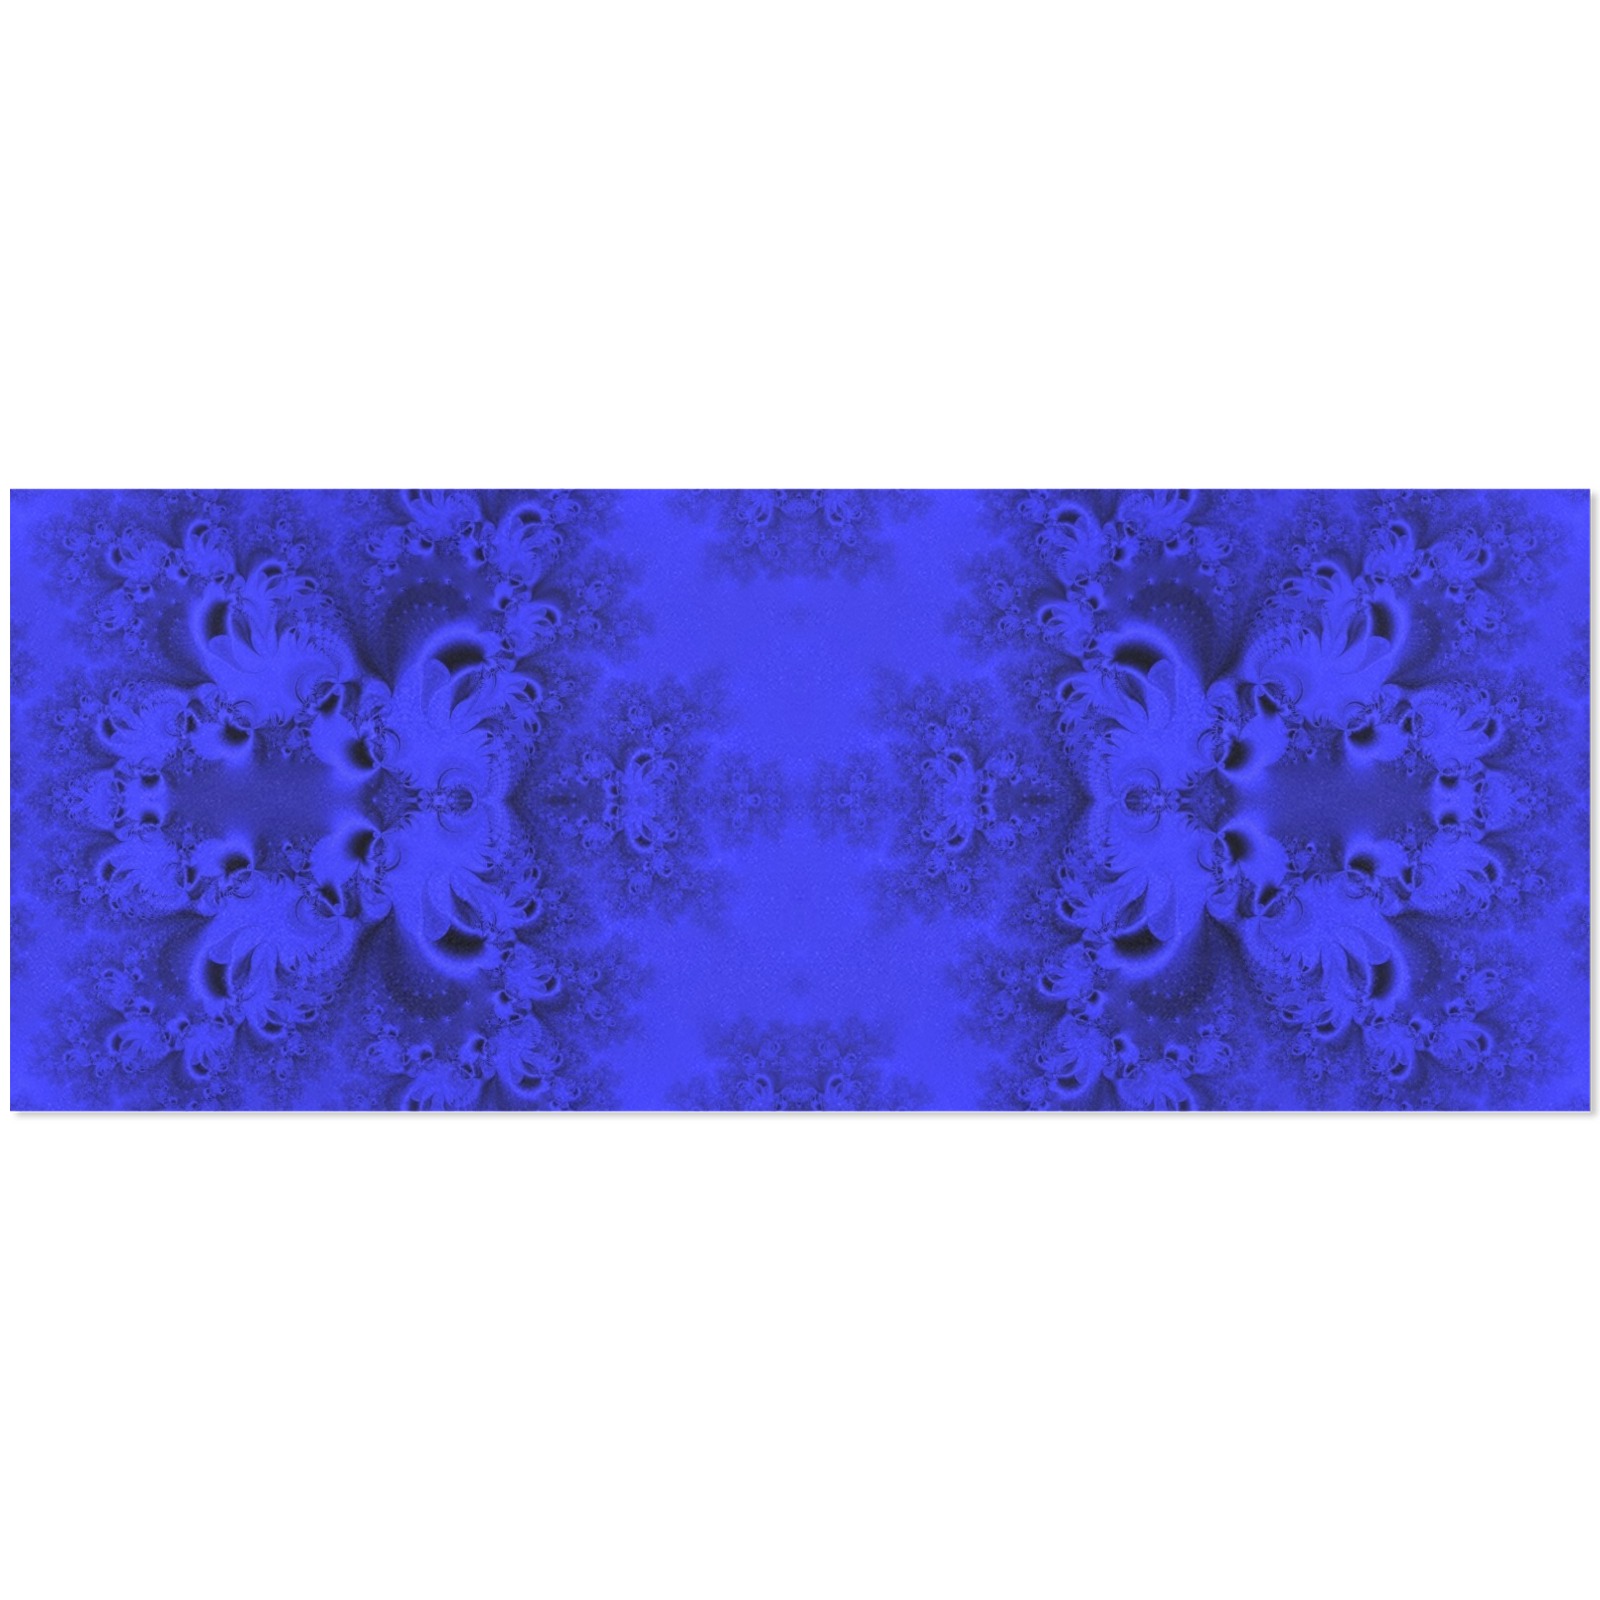 Midnight Blue Gardens Frost Fractal Gift Wrapping Paper 58"x 23" (2 Rolls)